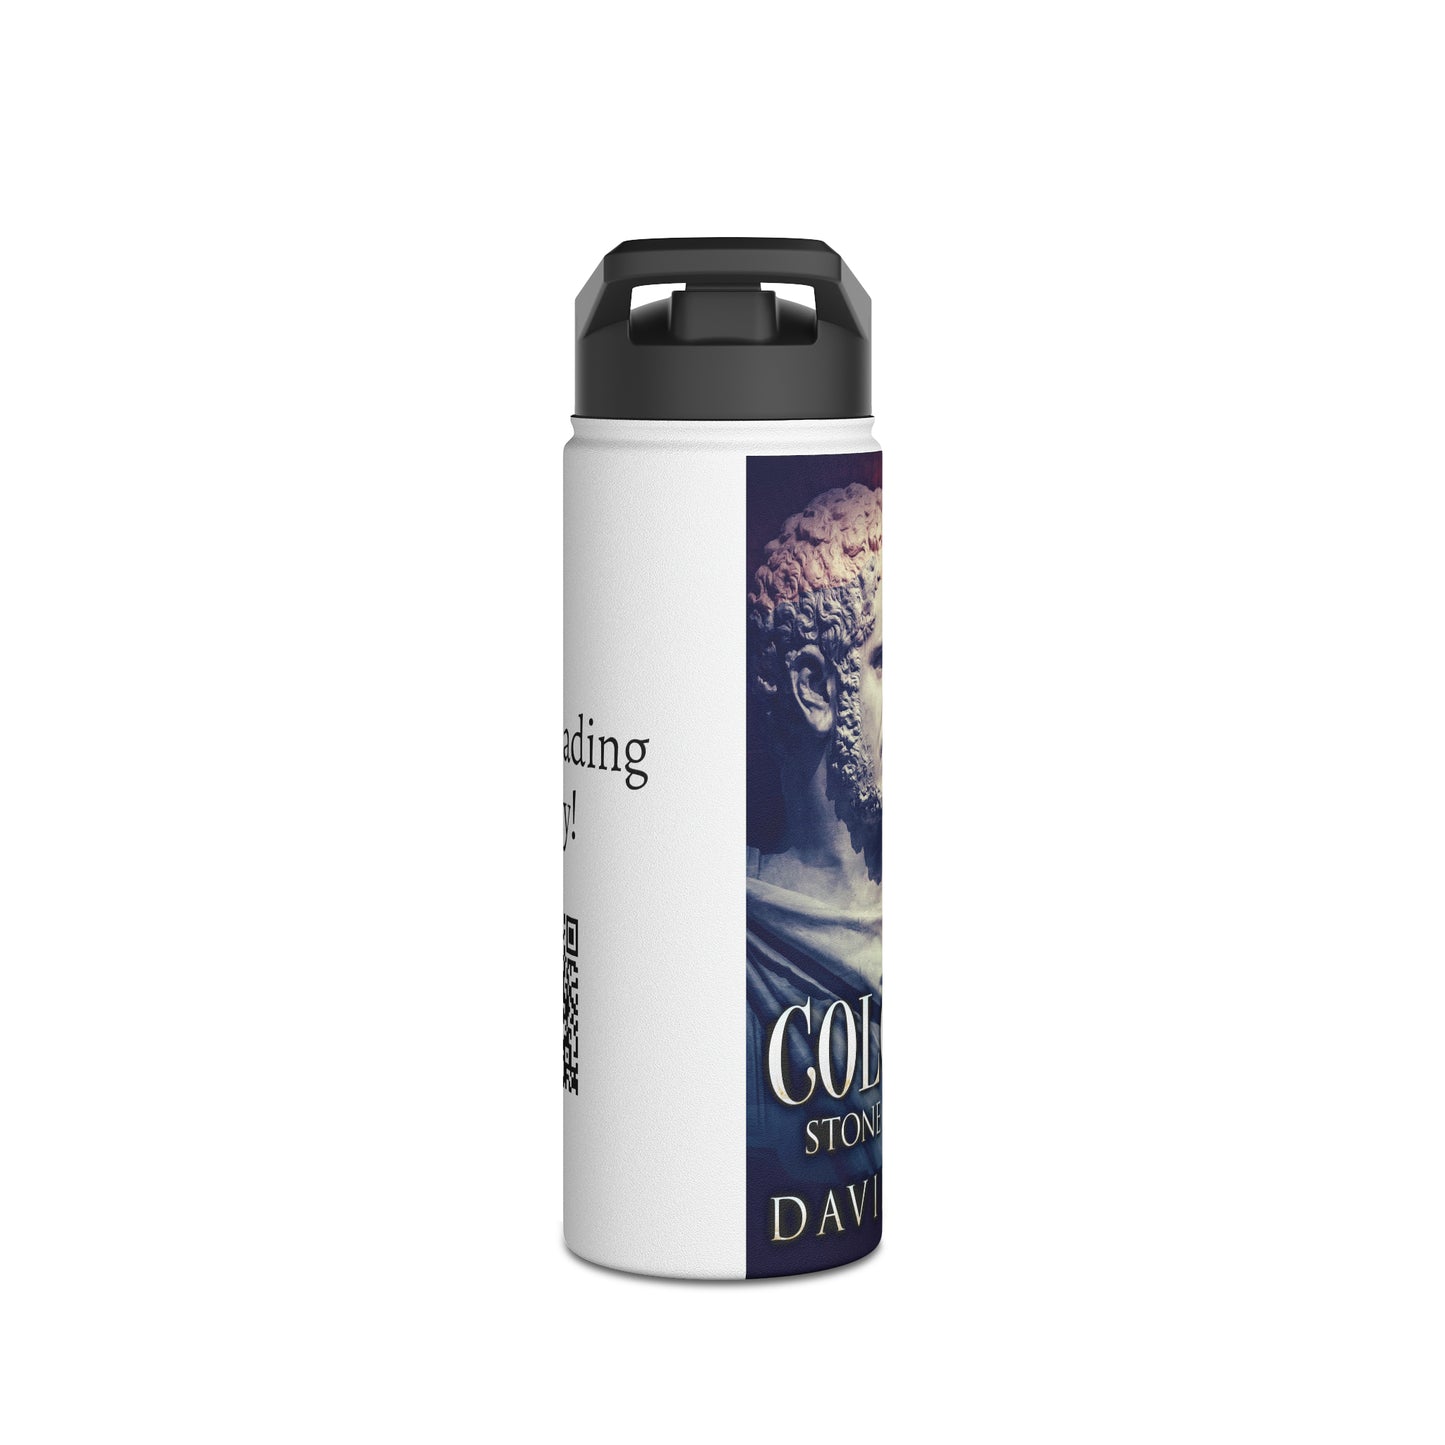 Stone and Steel - Stainless Steel Water Bottle